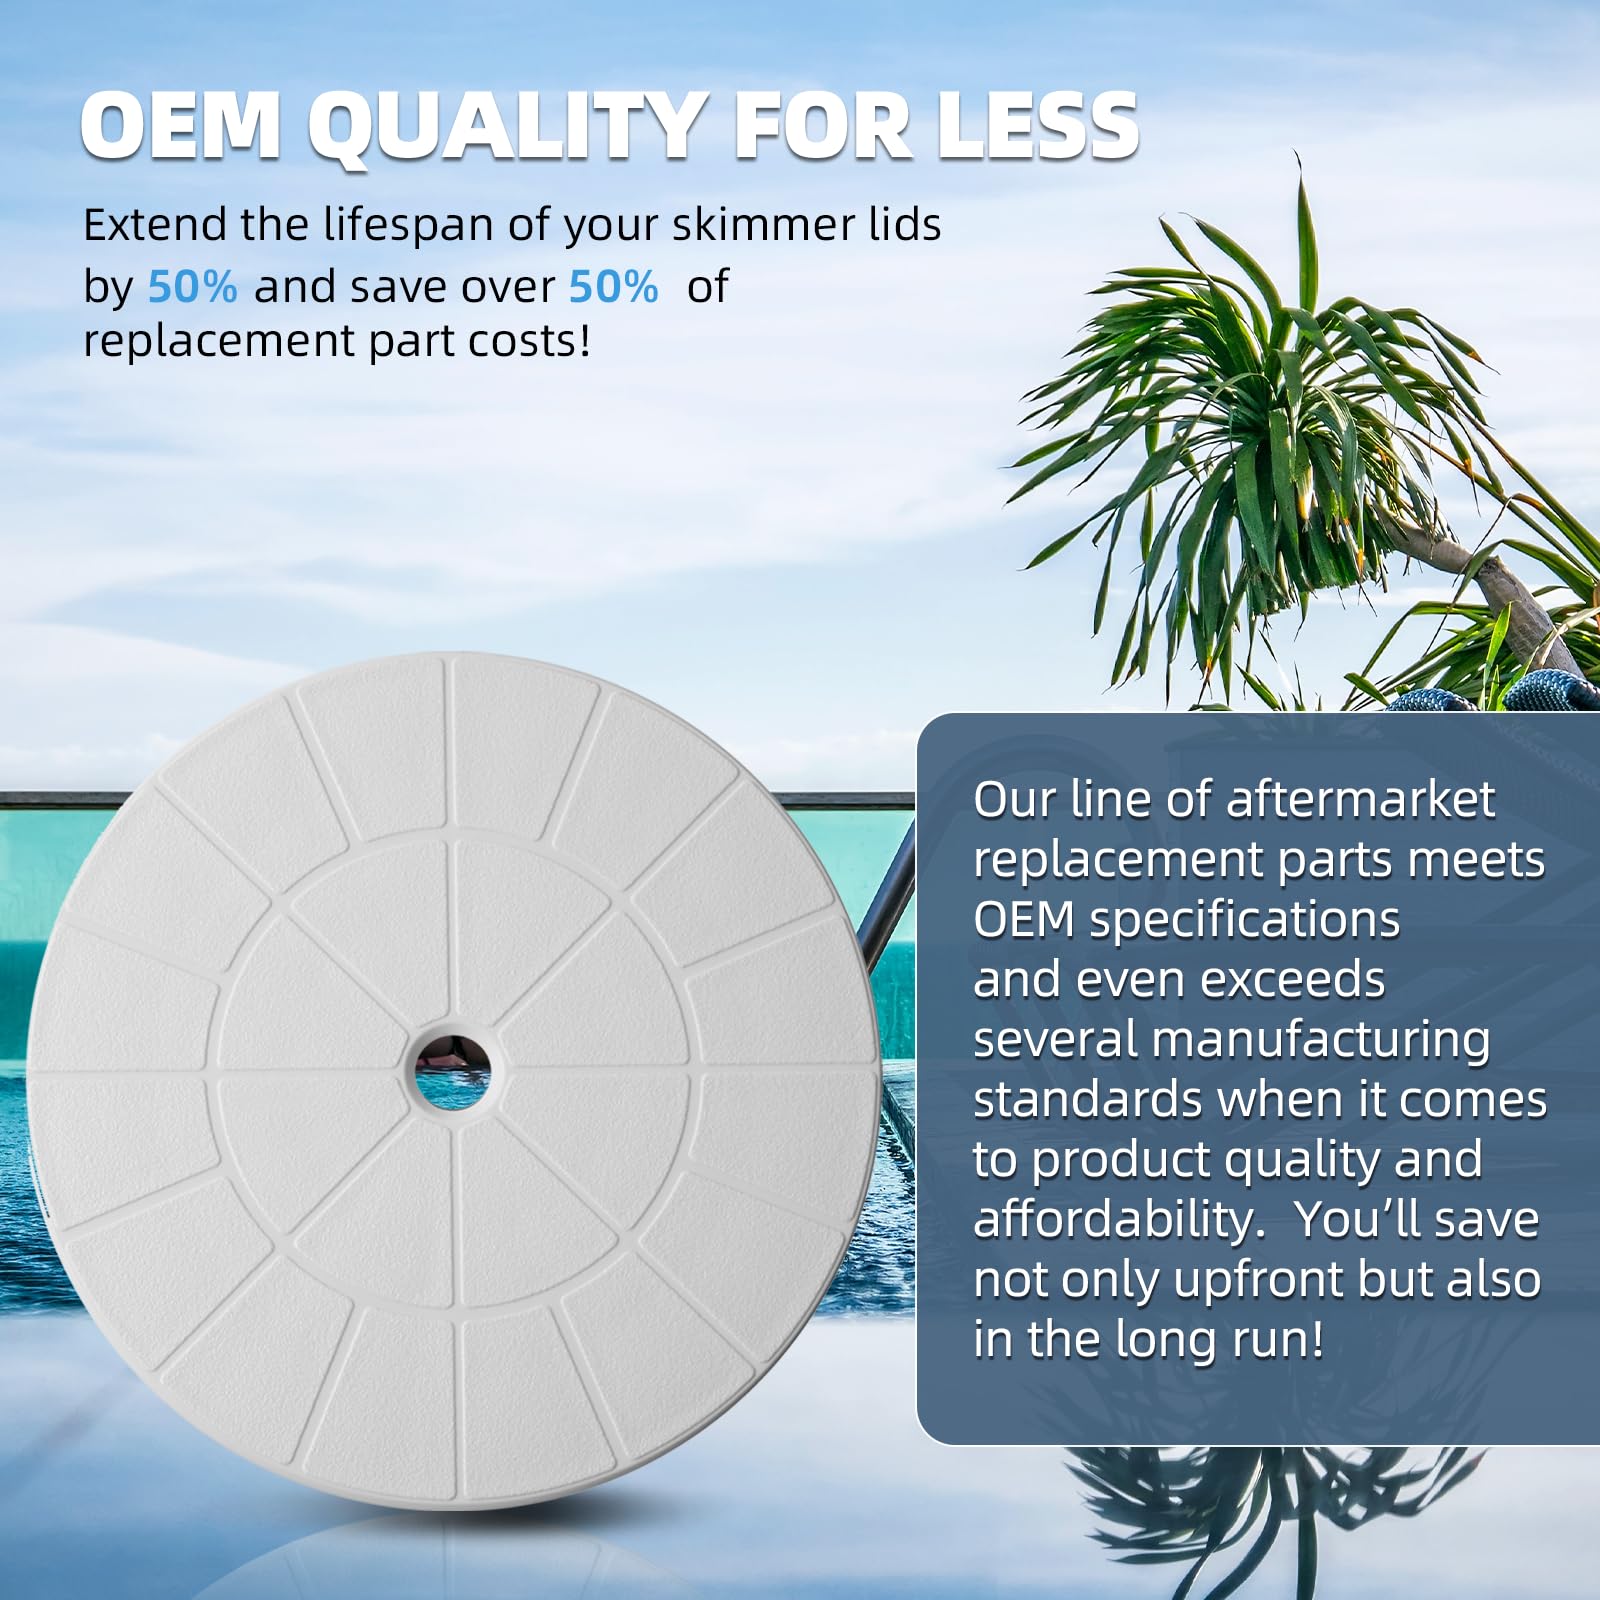 TonGass 9 1/8" Skimmer Valve Lids - Perfect Replacement Part for 9" Pool Lids & Spa Lids - Highly Durable Pool Skimmer Cover with UV Inhibitors